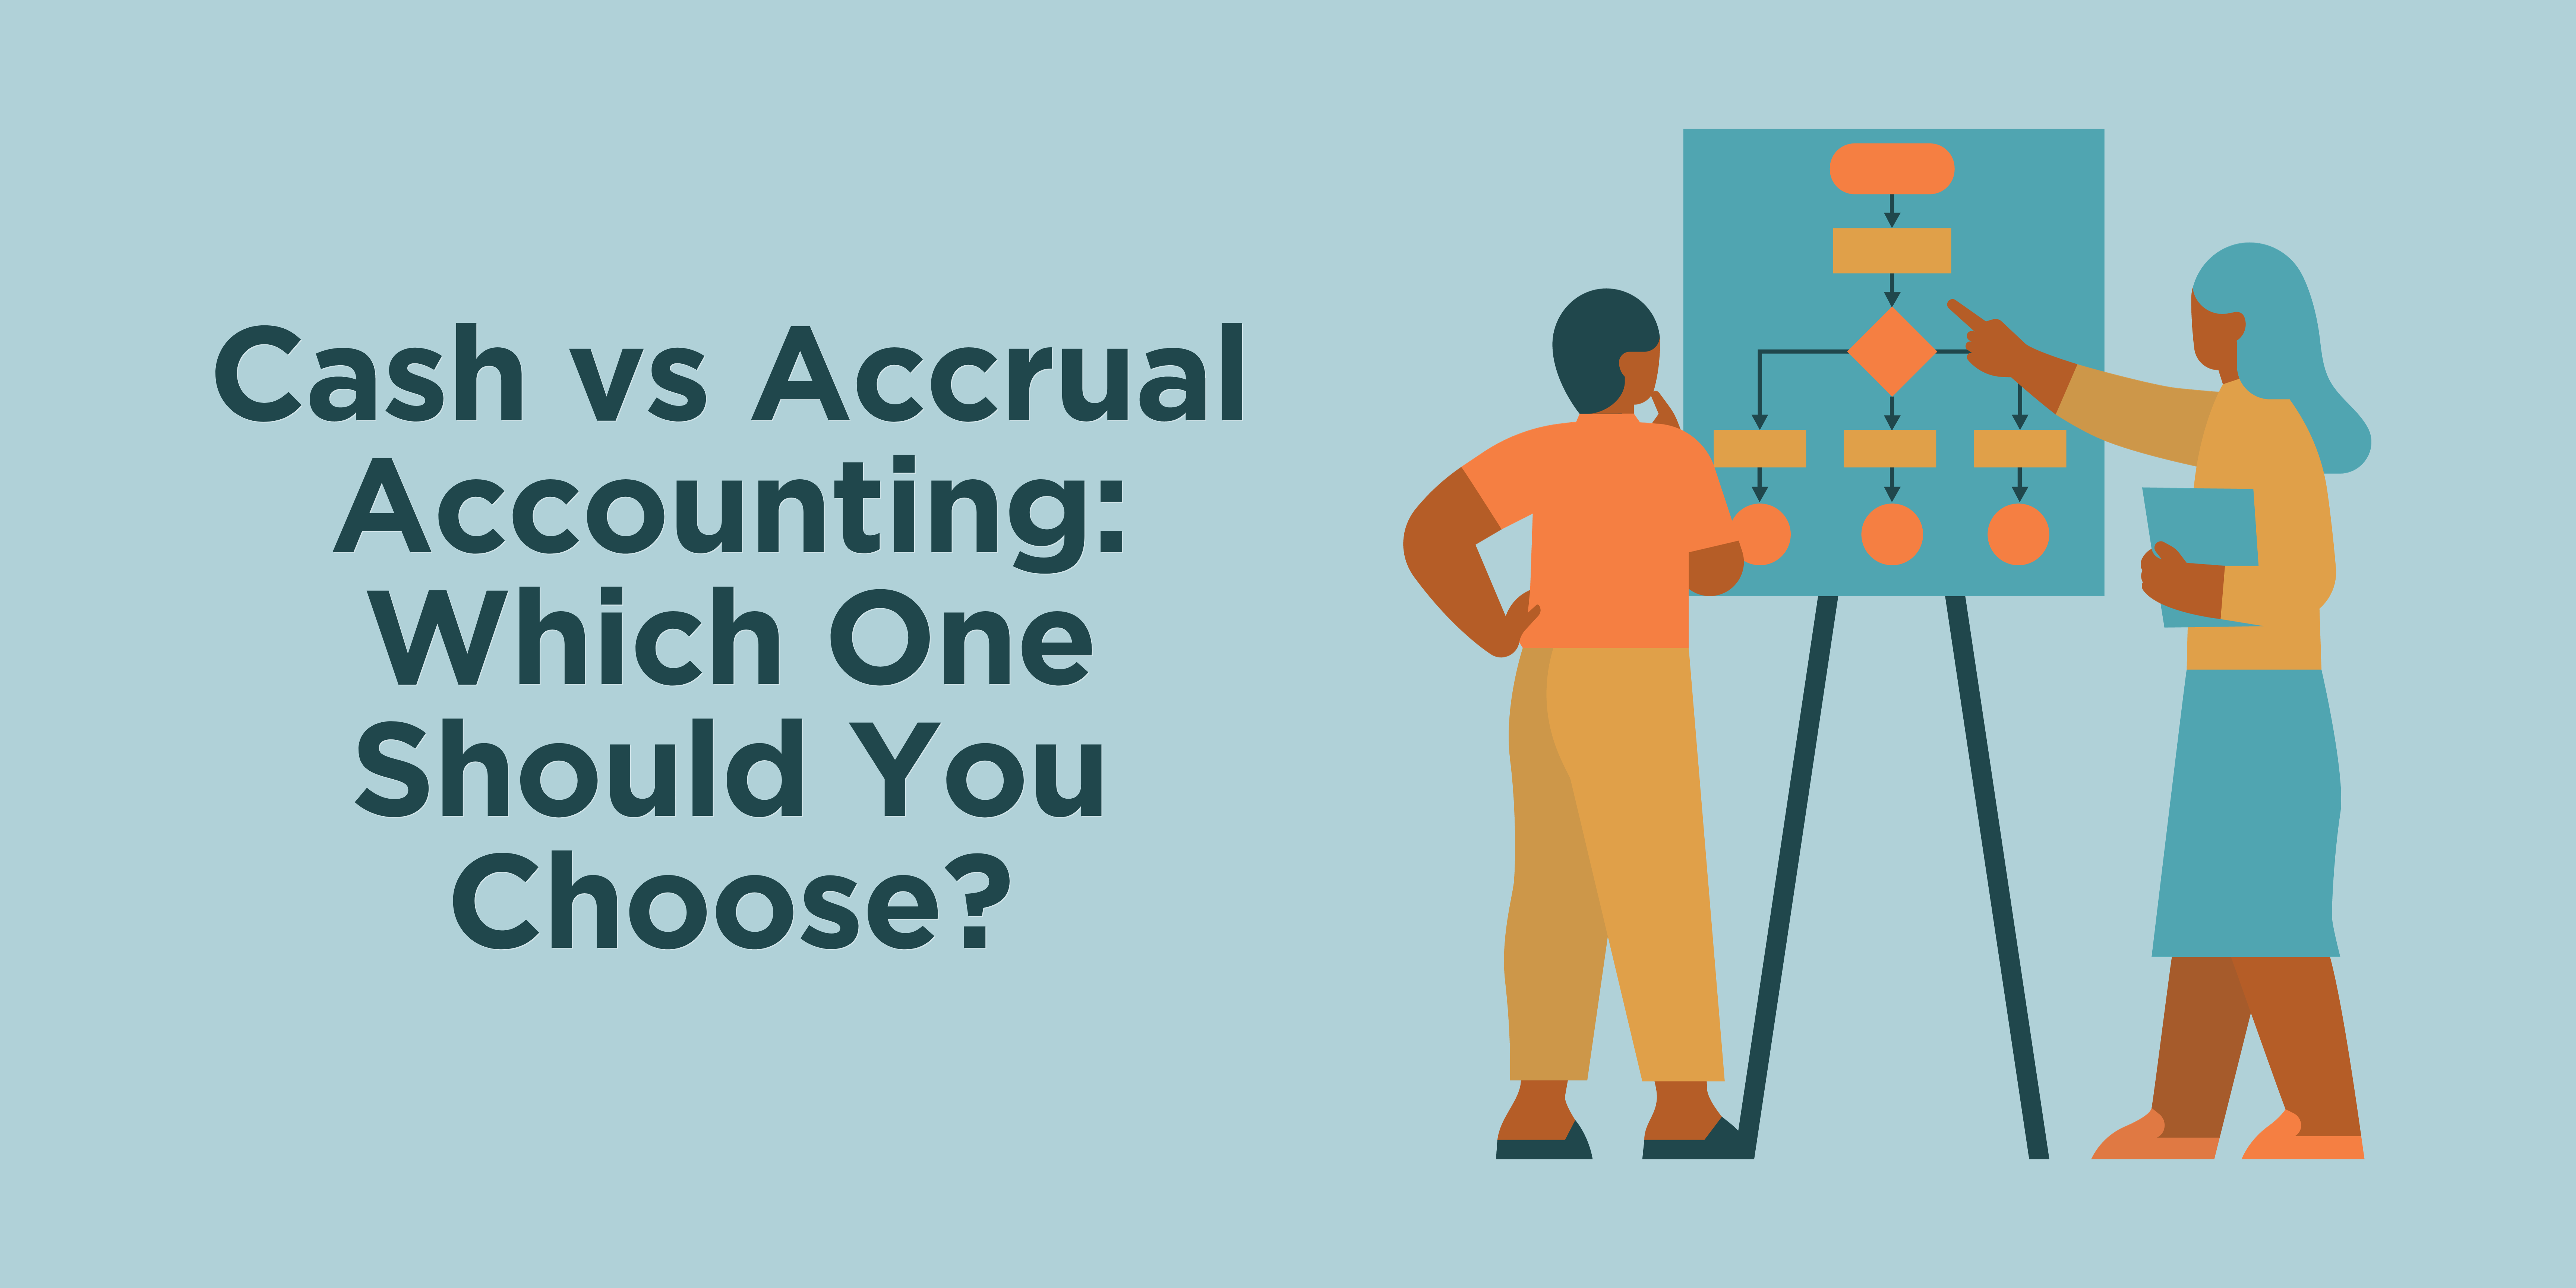 Cash vs Accrual Accounting: An Entrepreneur’s Guide to Choosing the Right Accounting Method